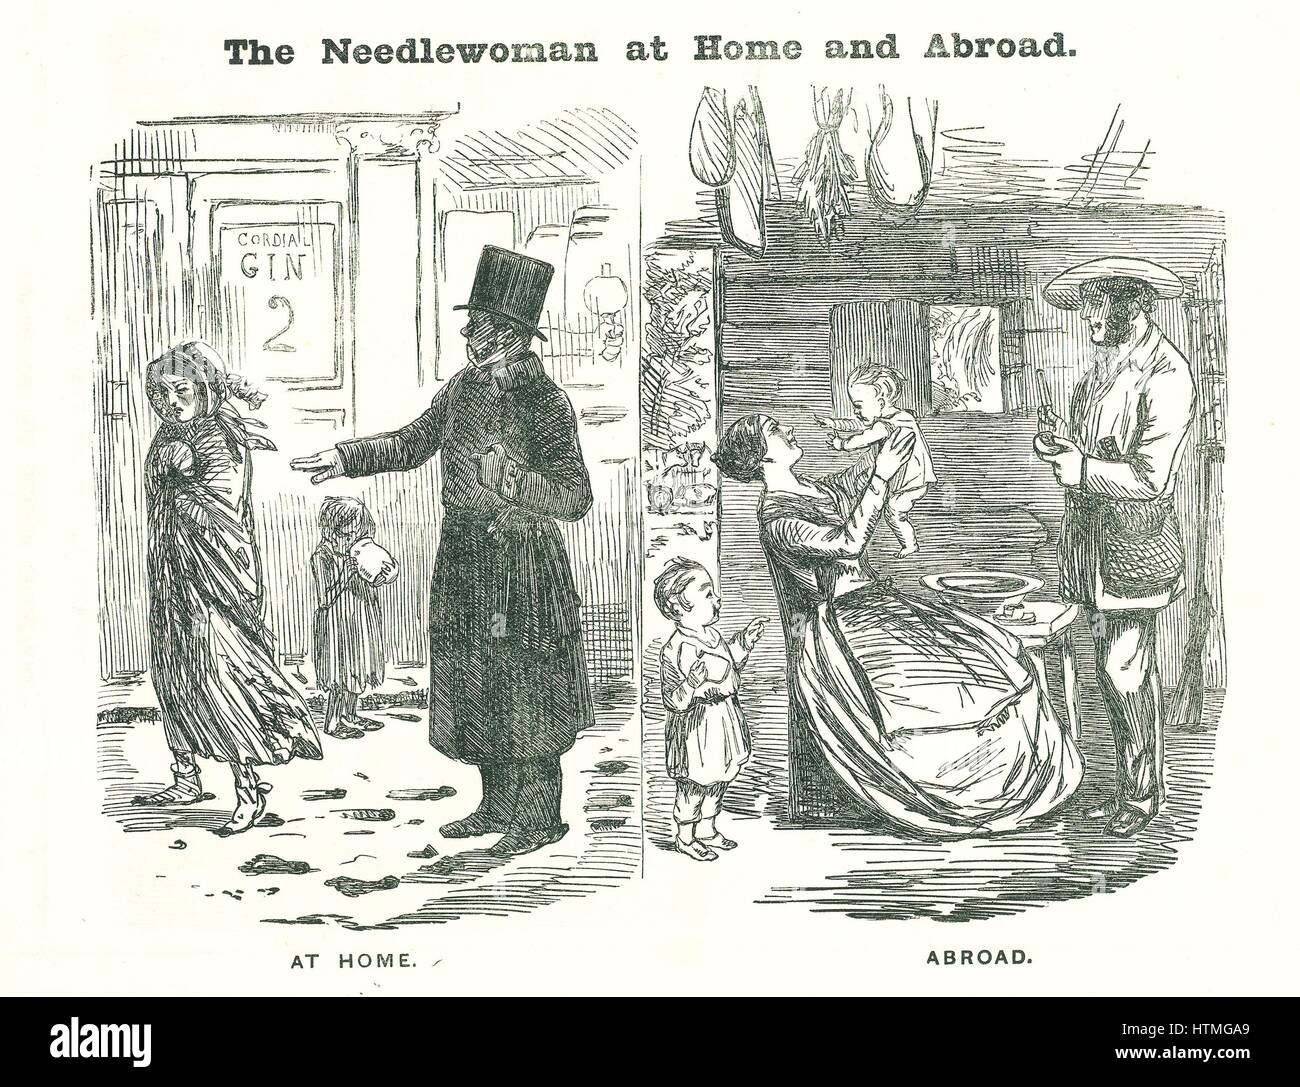 The Needlewoman at Home and Abroad': The advantages of emigration for the wretched British needlewoman on sweated wages. At this date skilled workers were given sponsored passages to emigrate to the colonies. Cartoon from 'Punch', London, 1850. Stock Photo